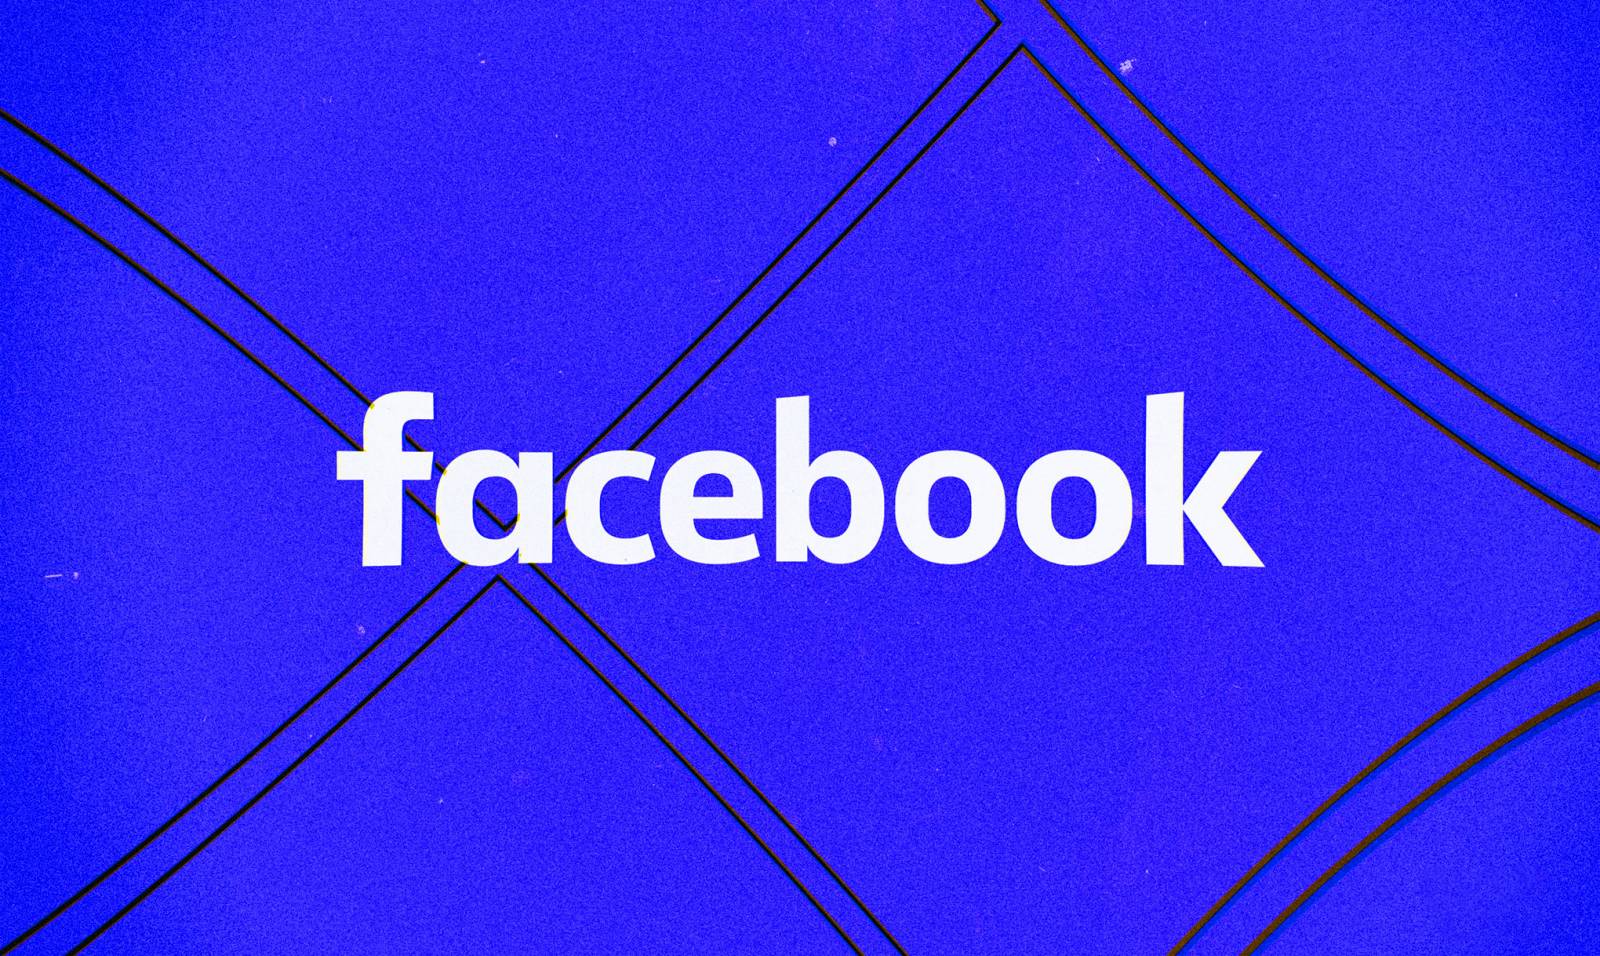 Facebook Update Released for Users Worldwide